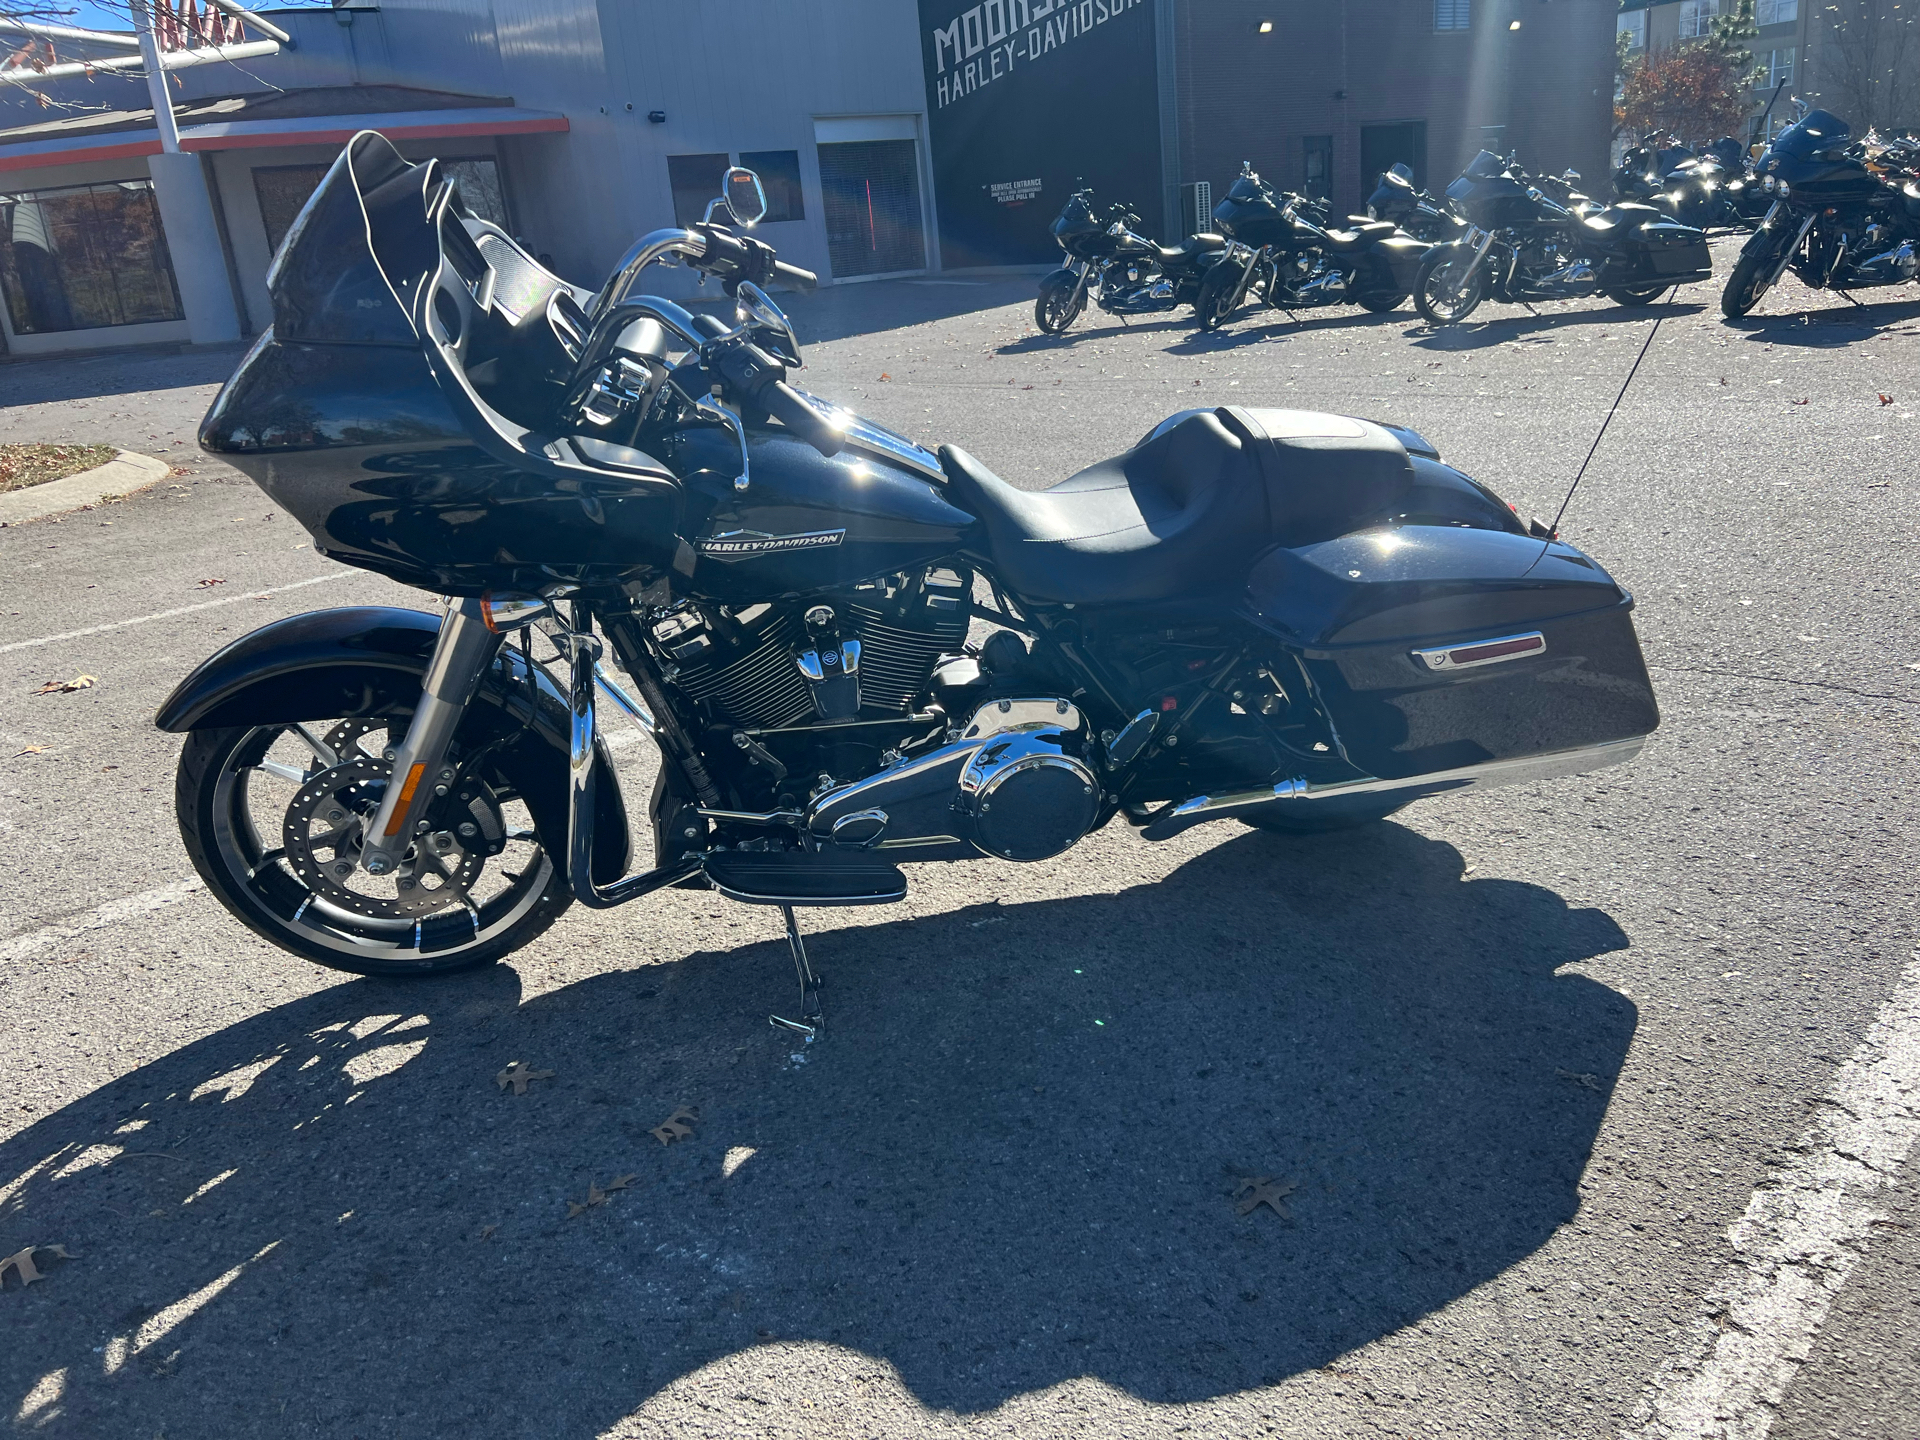 2023 Harley-Davidson Road Glide® in Franklin, Tennessee - Photo 21